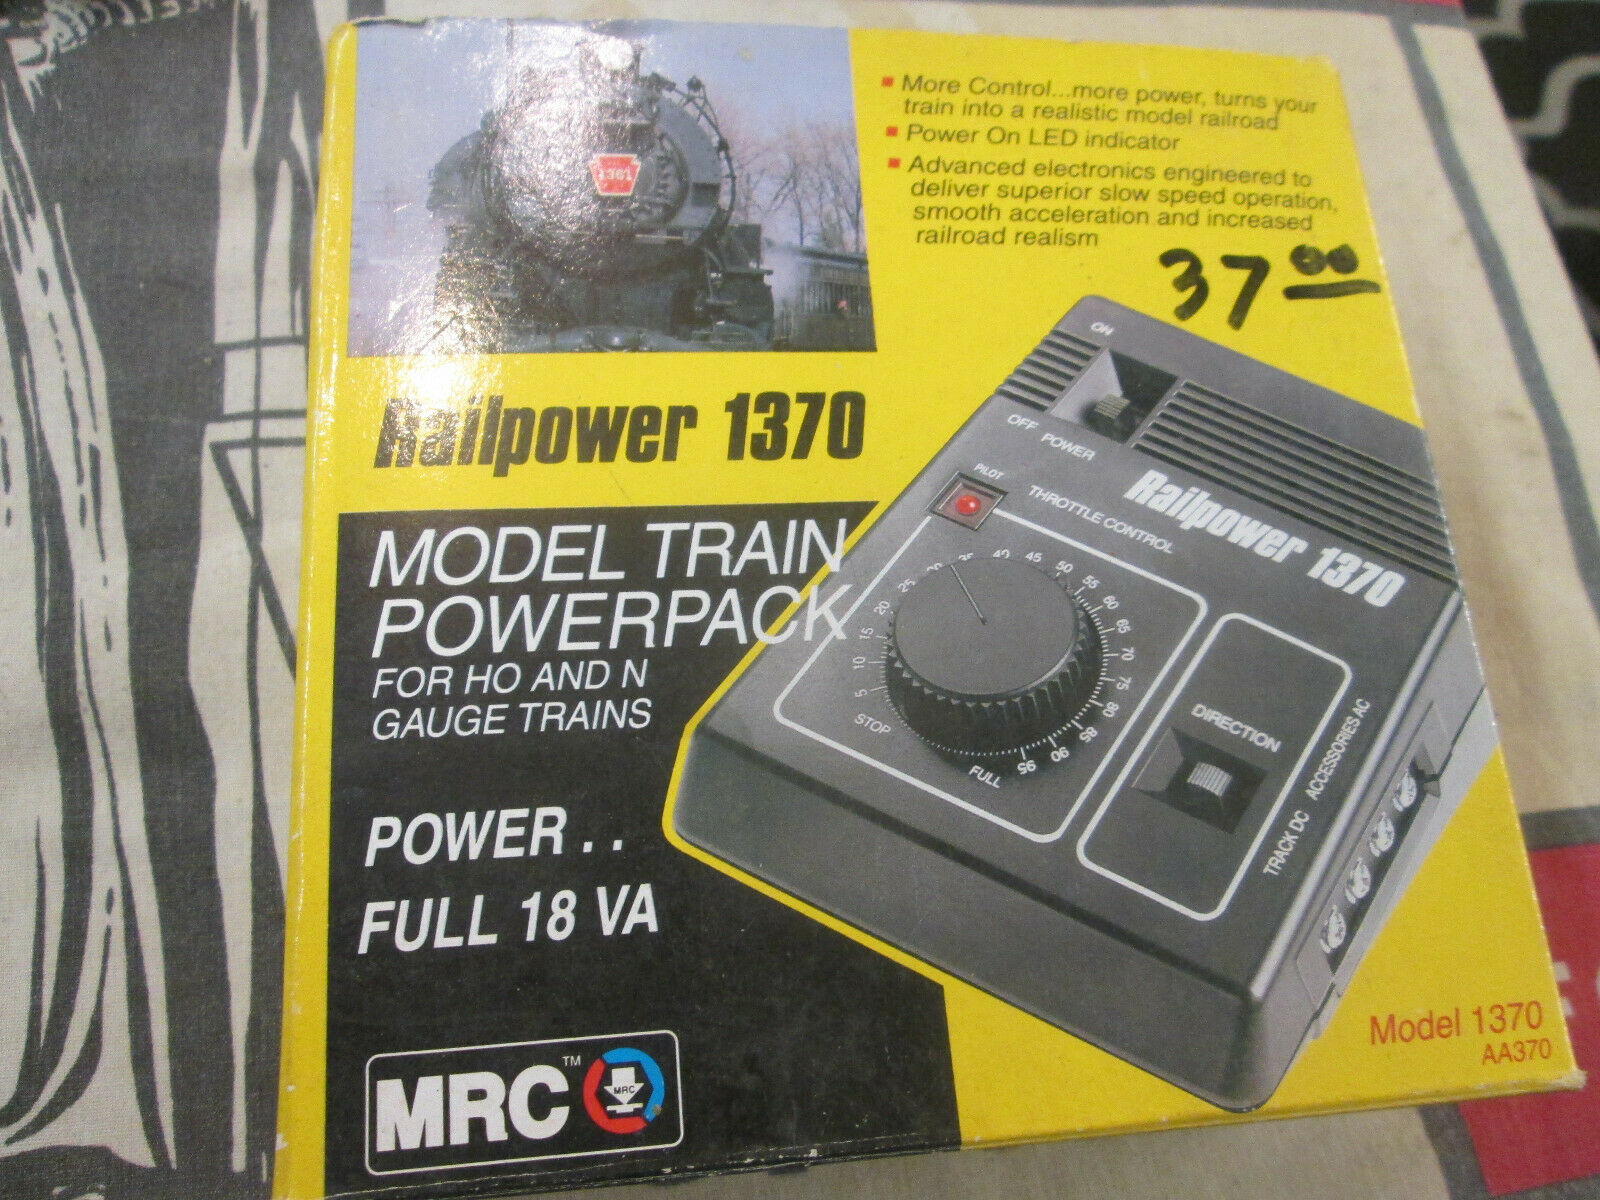 Railpower 1370 12v Powerpack (dc) For Ho & N Scale Trains By Mrc